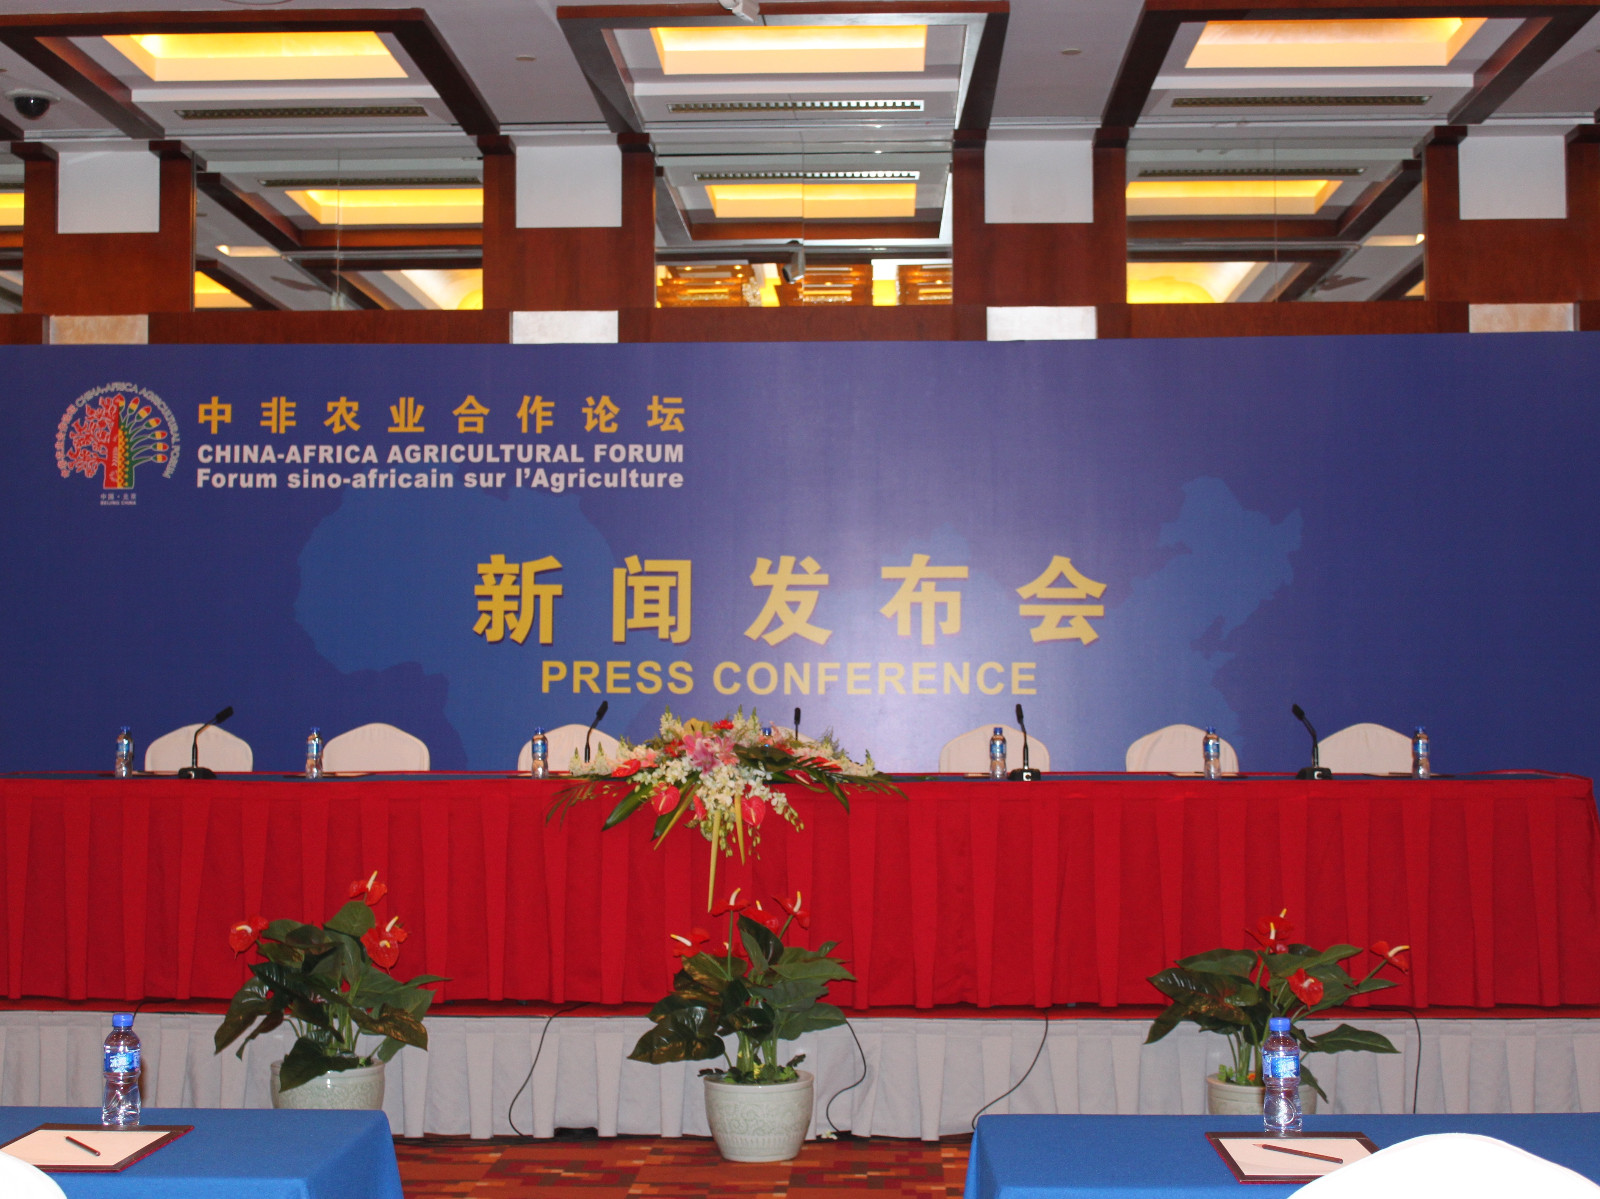 China-Africa Agricultural Forum2010